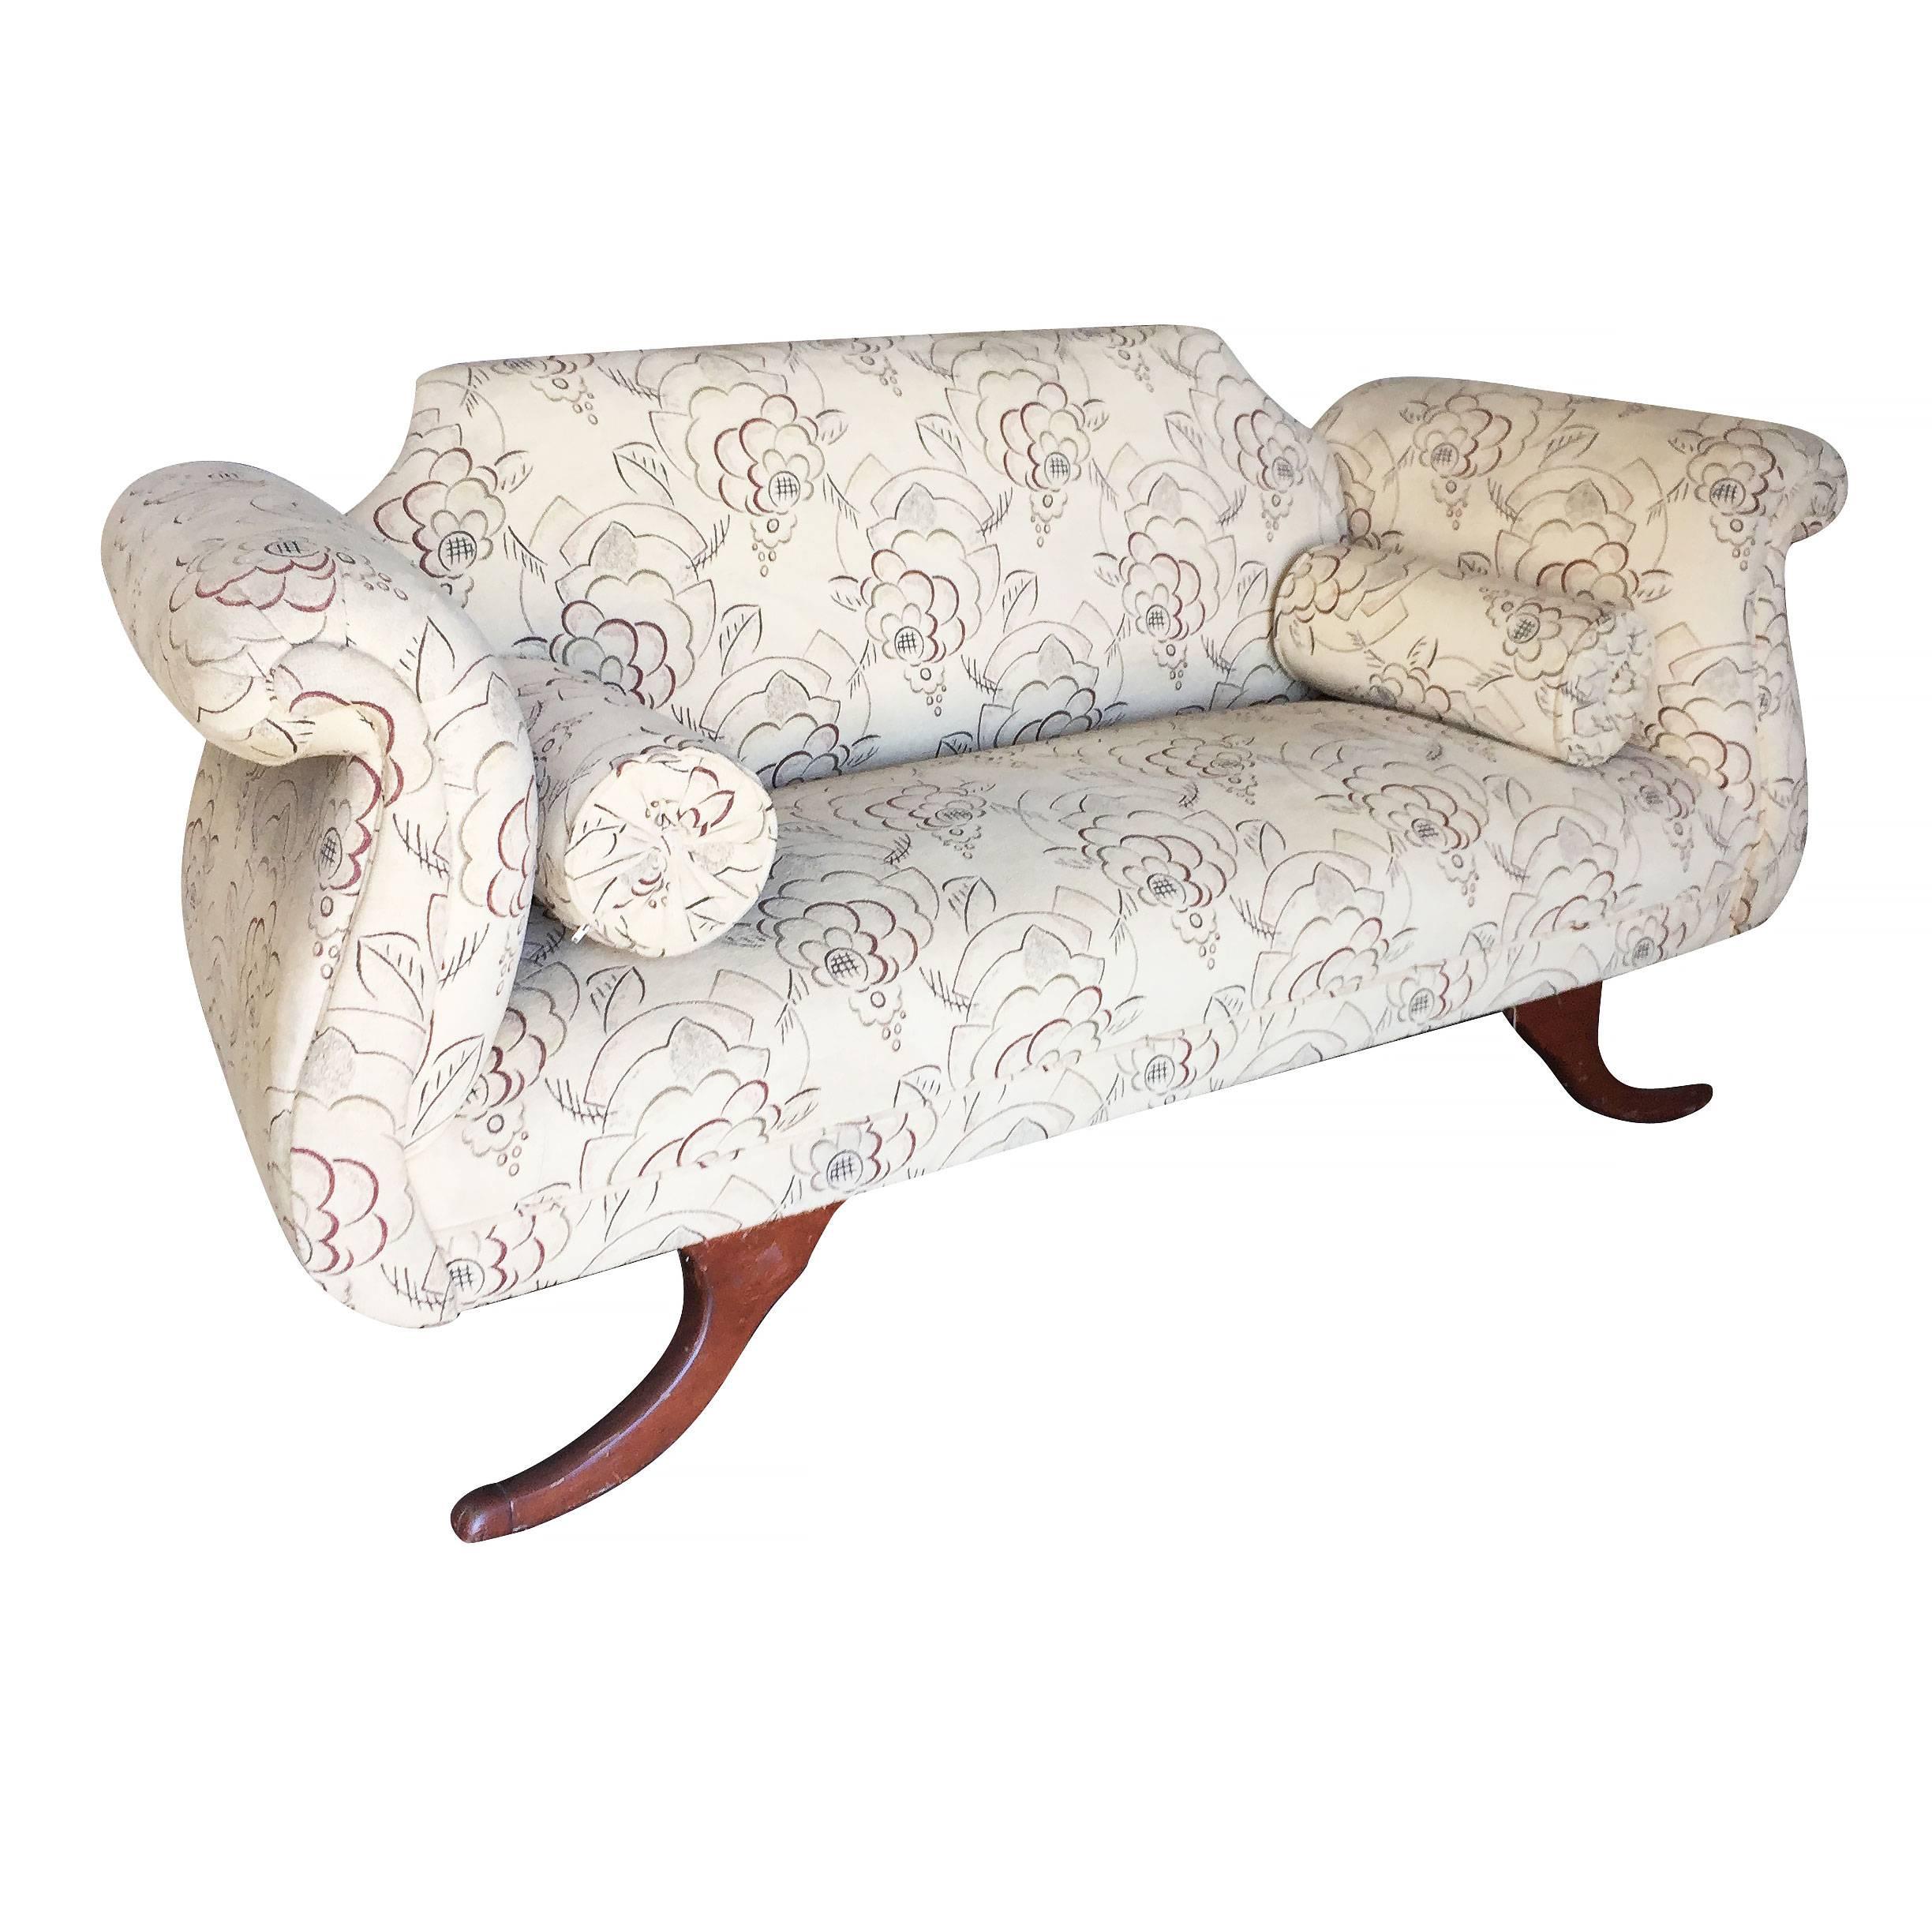 Duncan Phyfe Style Love Seat Settee with Scrolling Arms For Sale